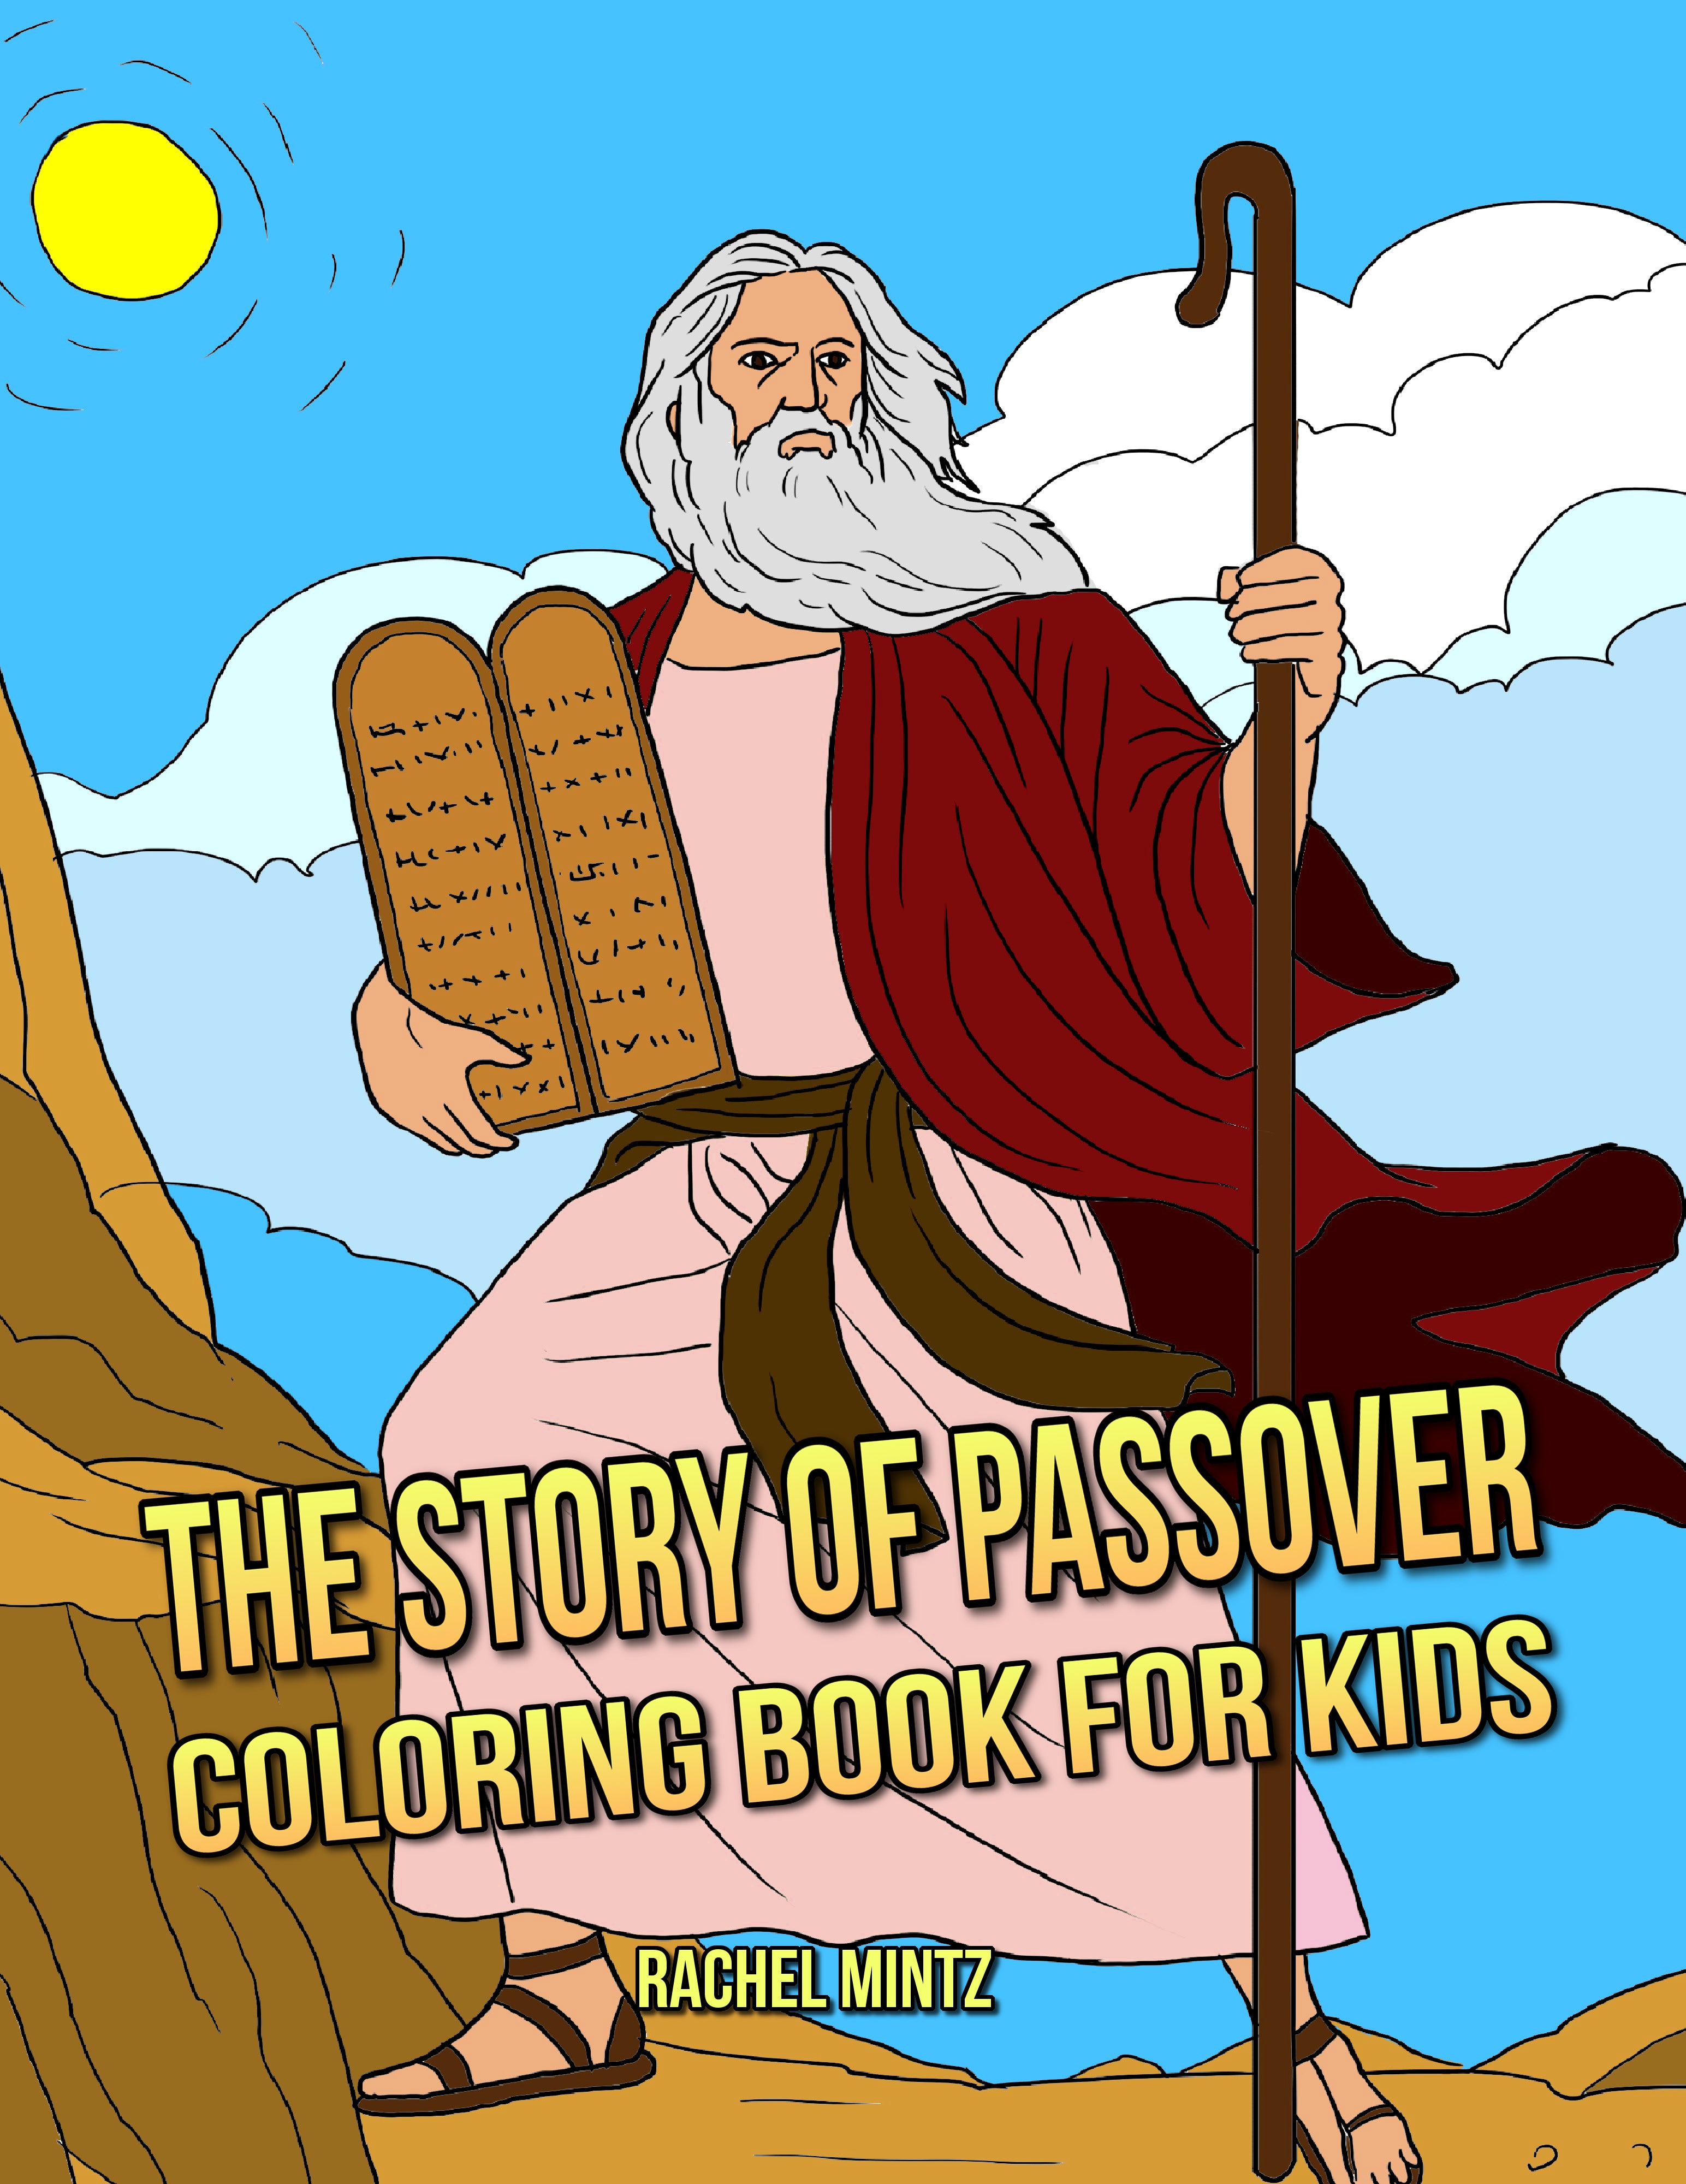 The story of passover coloring pdf book for kids â rachel mintz coloring books